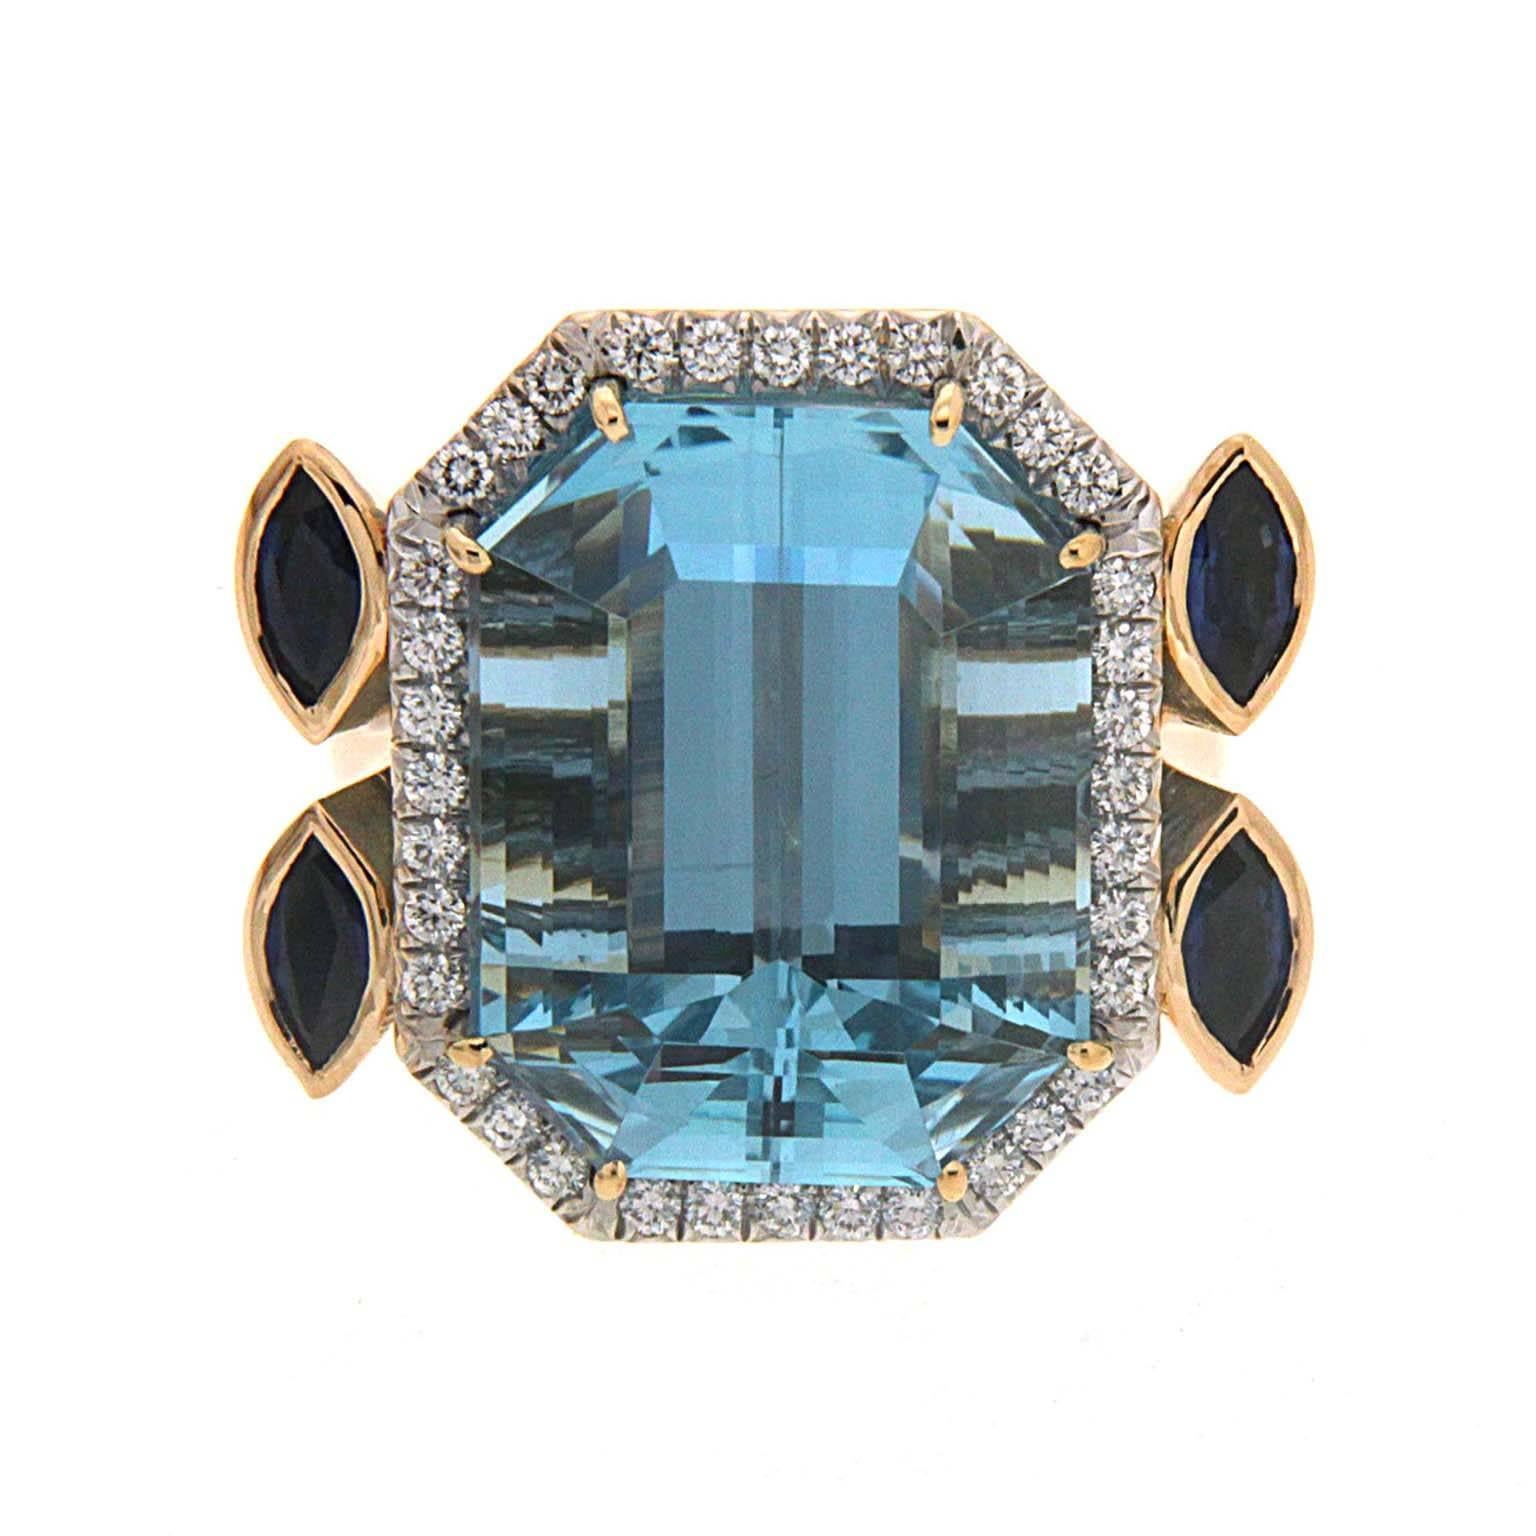 Blue highlights this ring created by Valentin Magro. Its showpiece jewel is an emerald cut aquamarine bordered with pave set round brilliant cut diamonds. Pear shaped aquamarines appear beneath the diamonds. Double bands tipped with marquise shaped